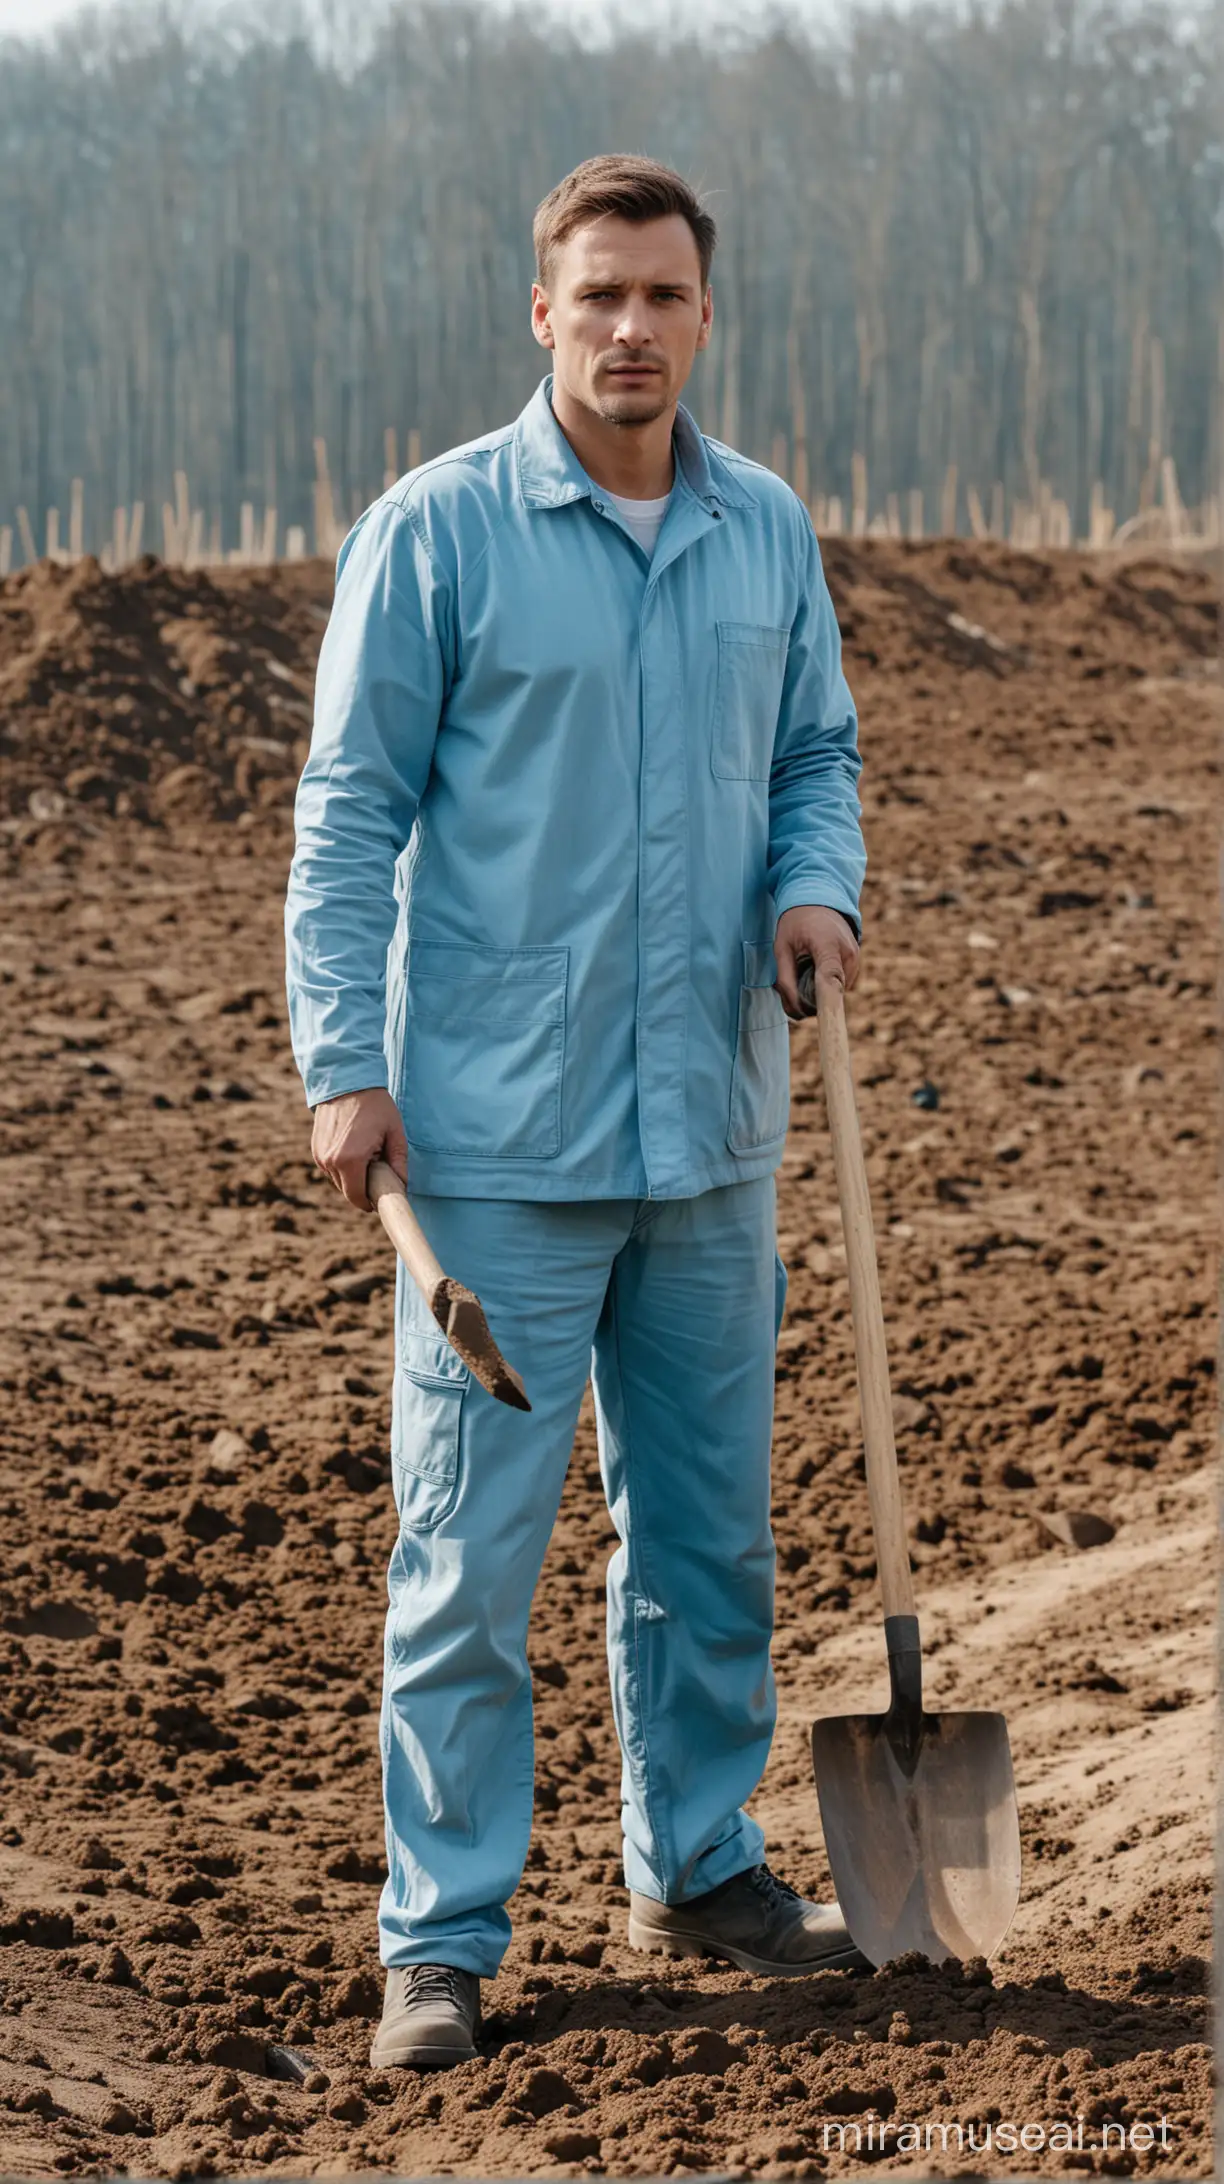 European Foreman Supervising Ground Digging Workers in Light Blue Attire